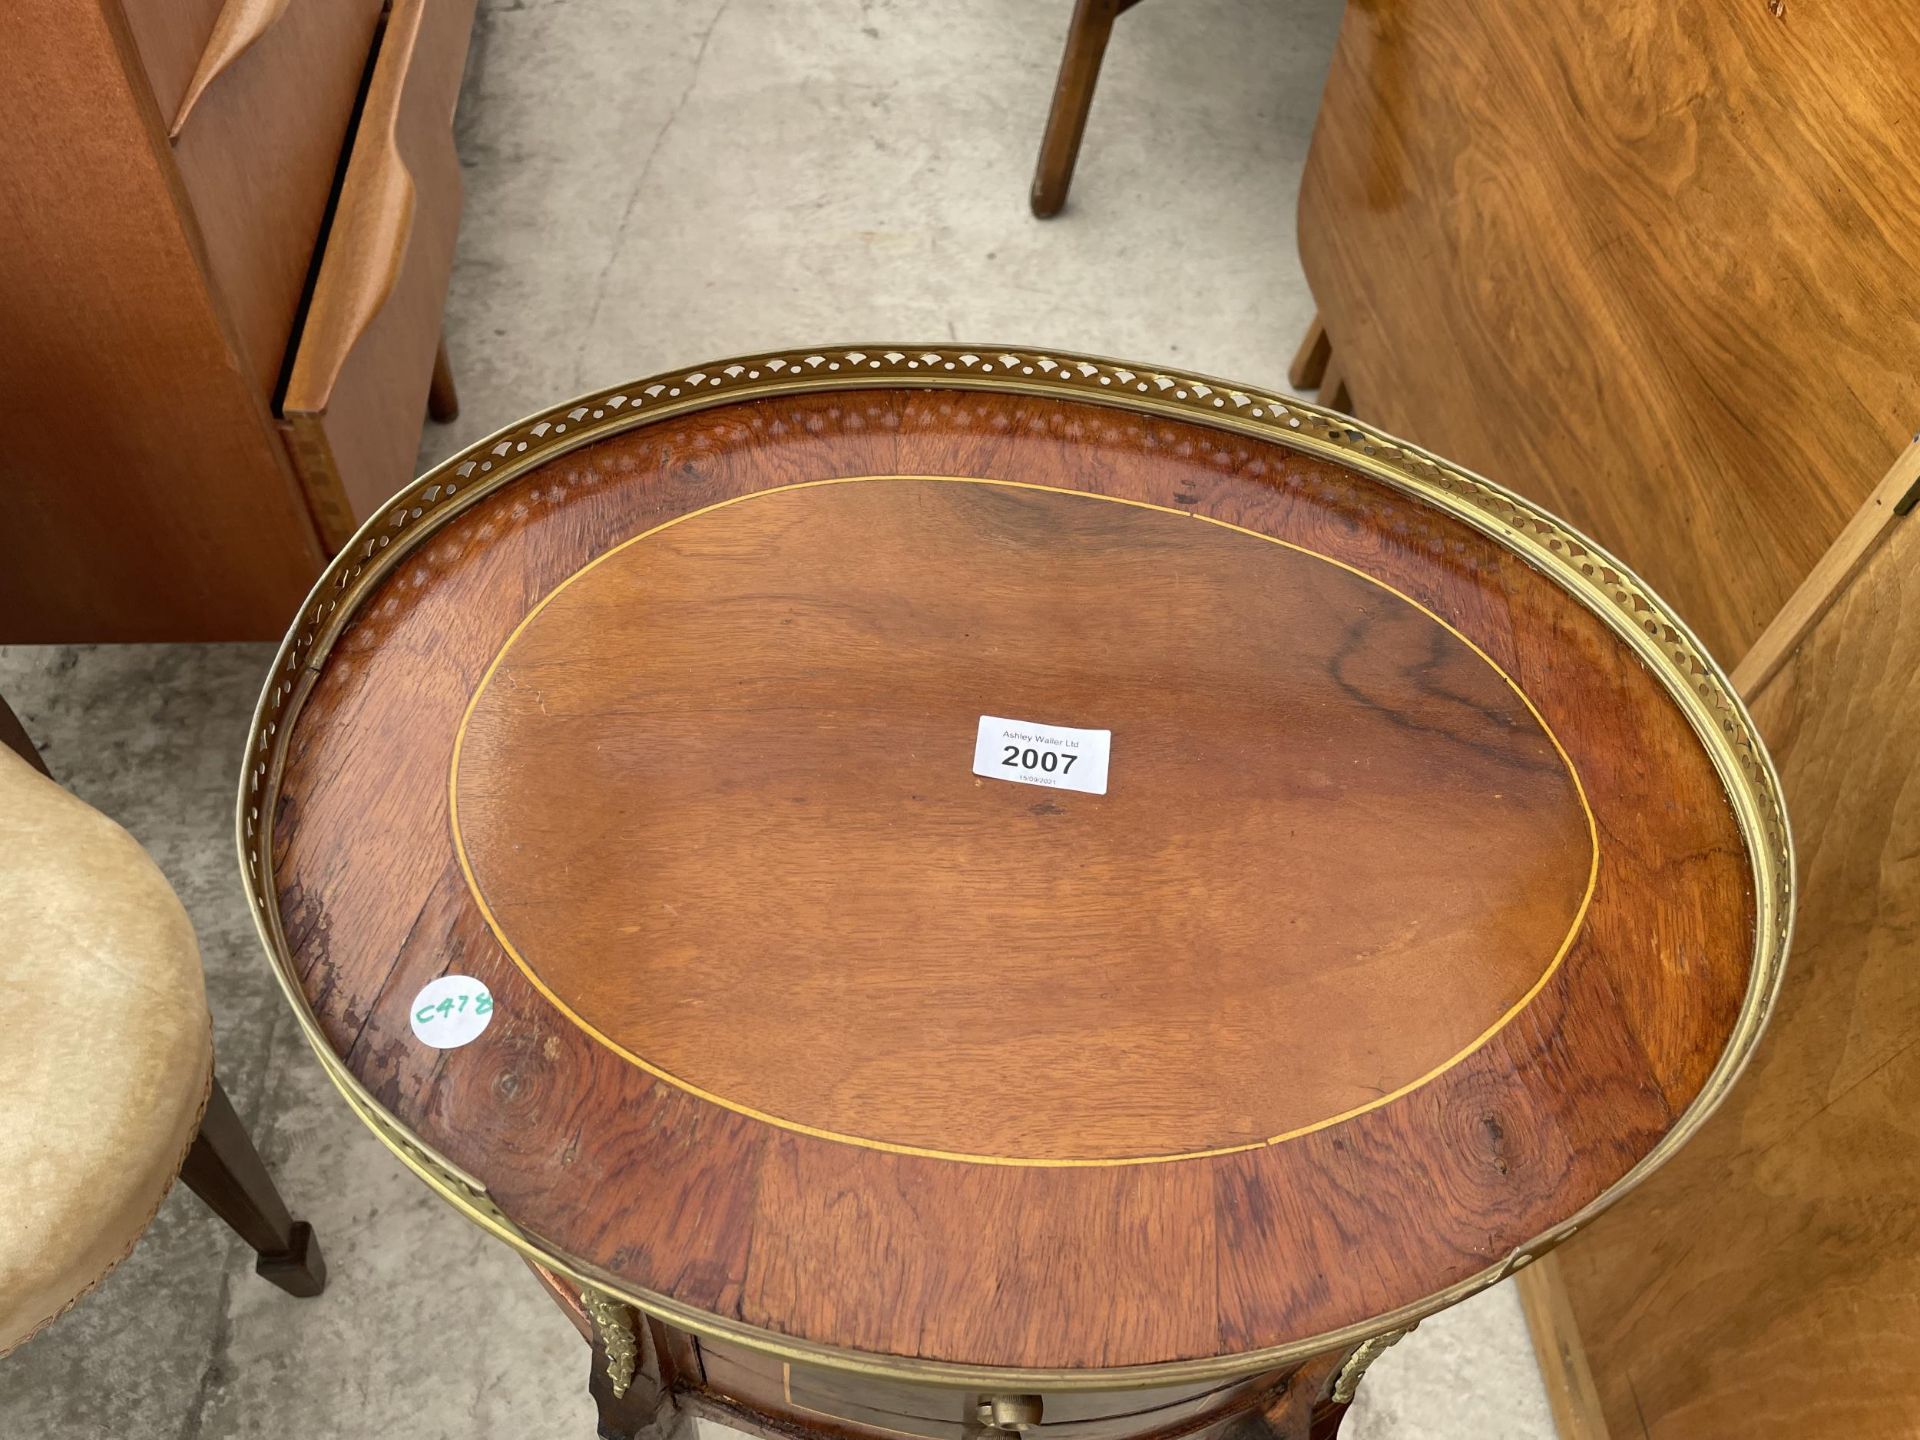 AN OVAL LOUIS XVI STYLE WALNUT SIDE TABLE WITH THREE SMALL DRAWERS, BRASS PIERCED GALLERY AND - Image 2 of 6